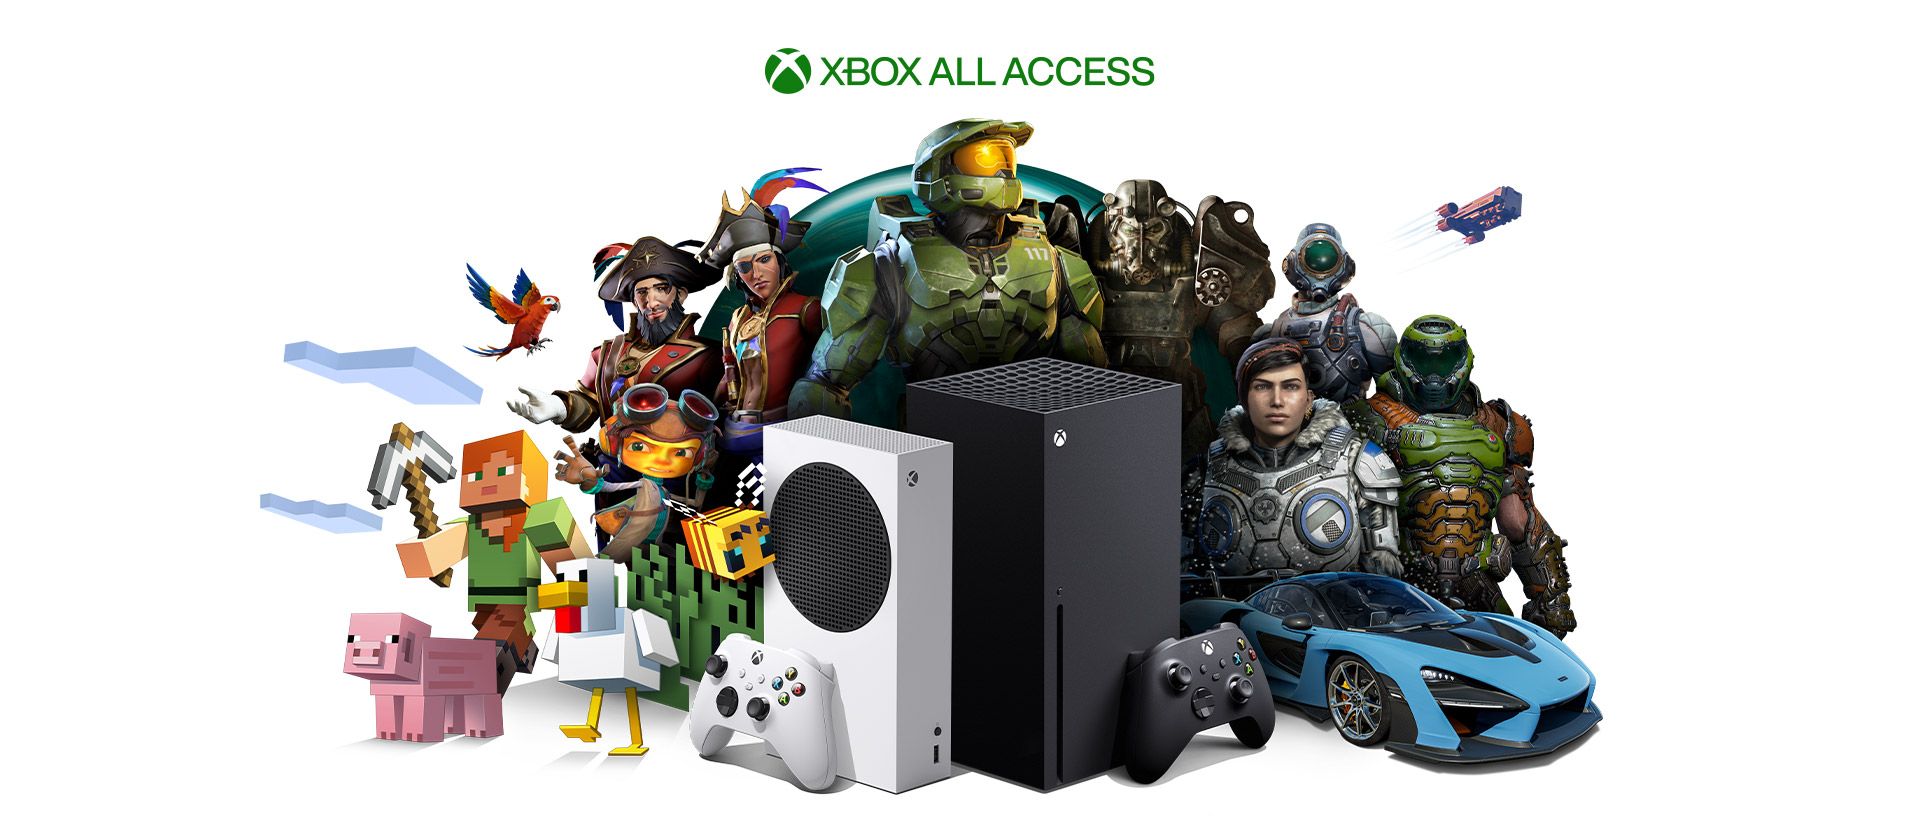 Xbox All Access, Xbox Series X and Xbox Series S with Xbox game characters 